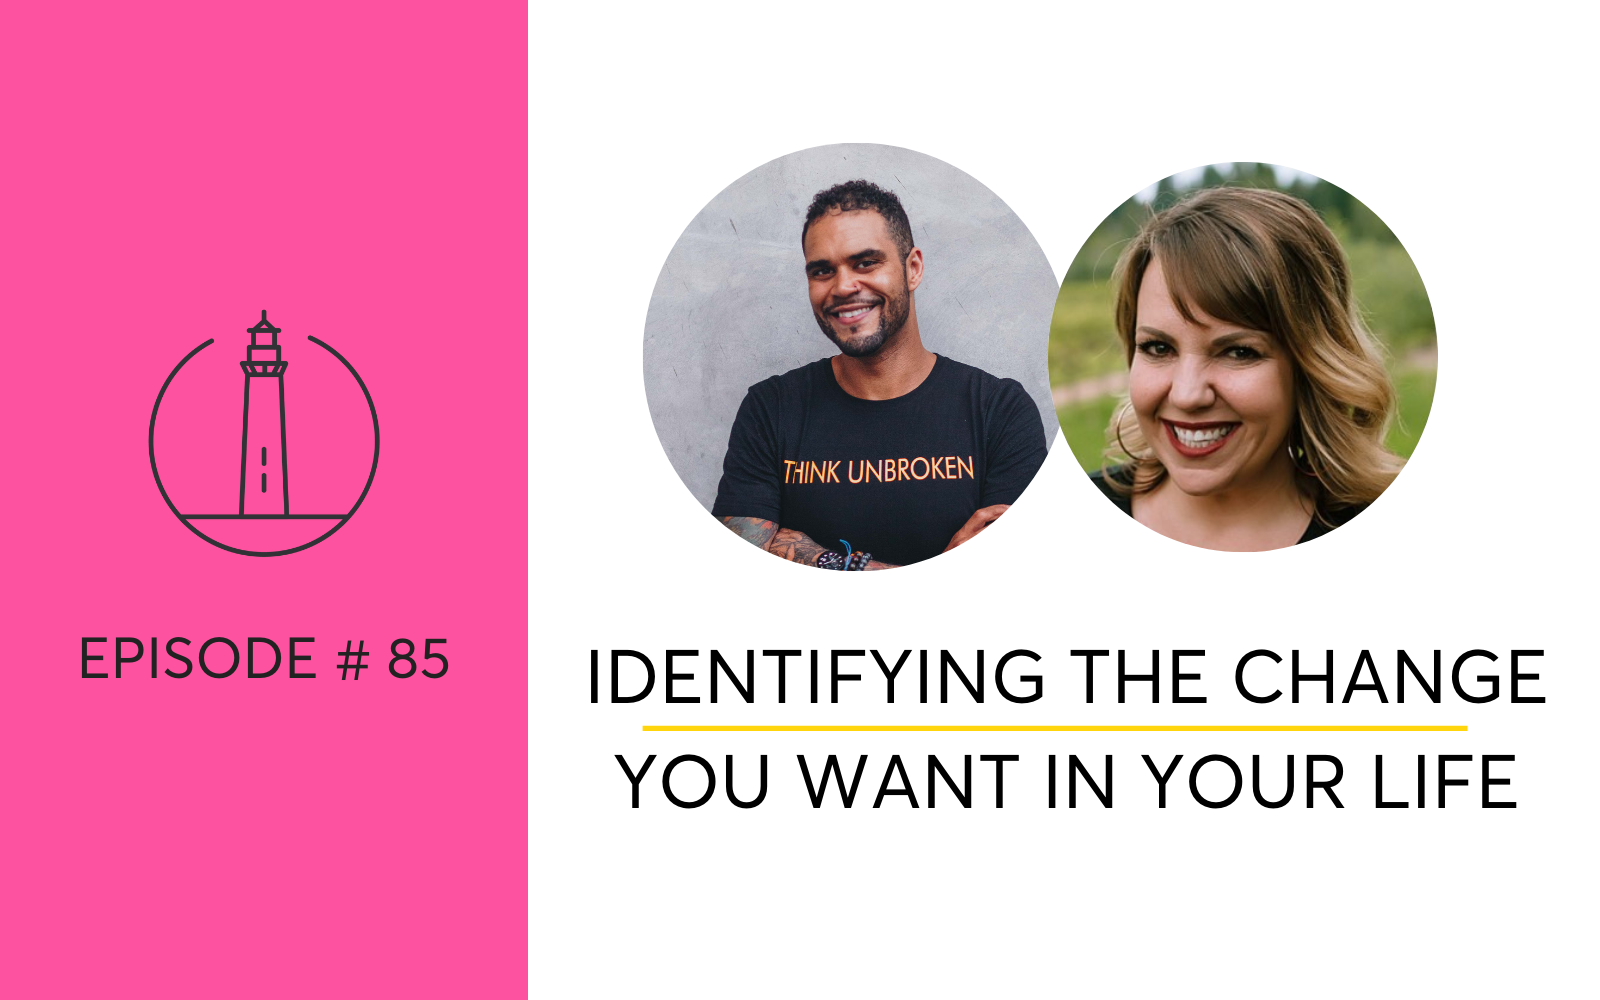 Identifying The Change You Want In Your Life + Getting Unstuck